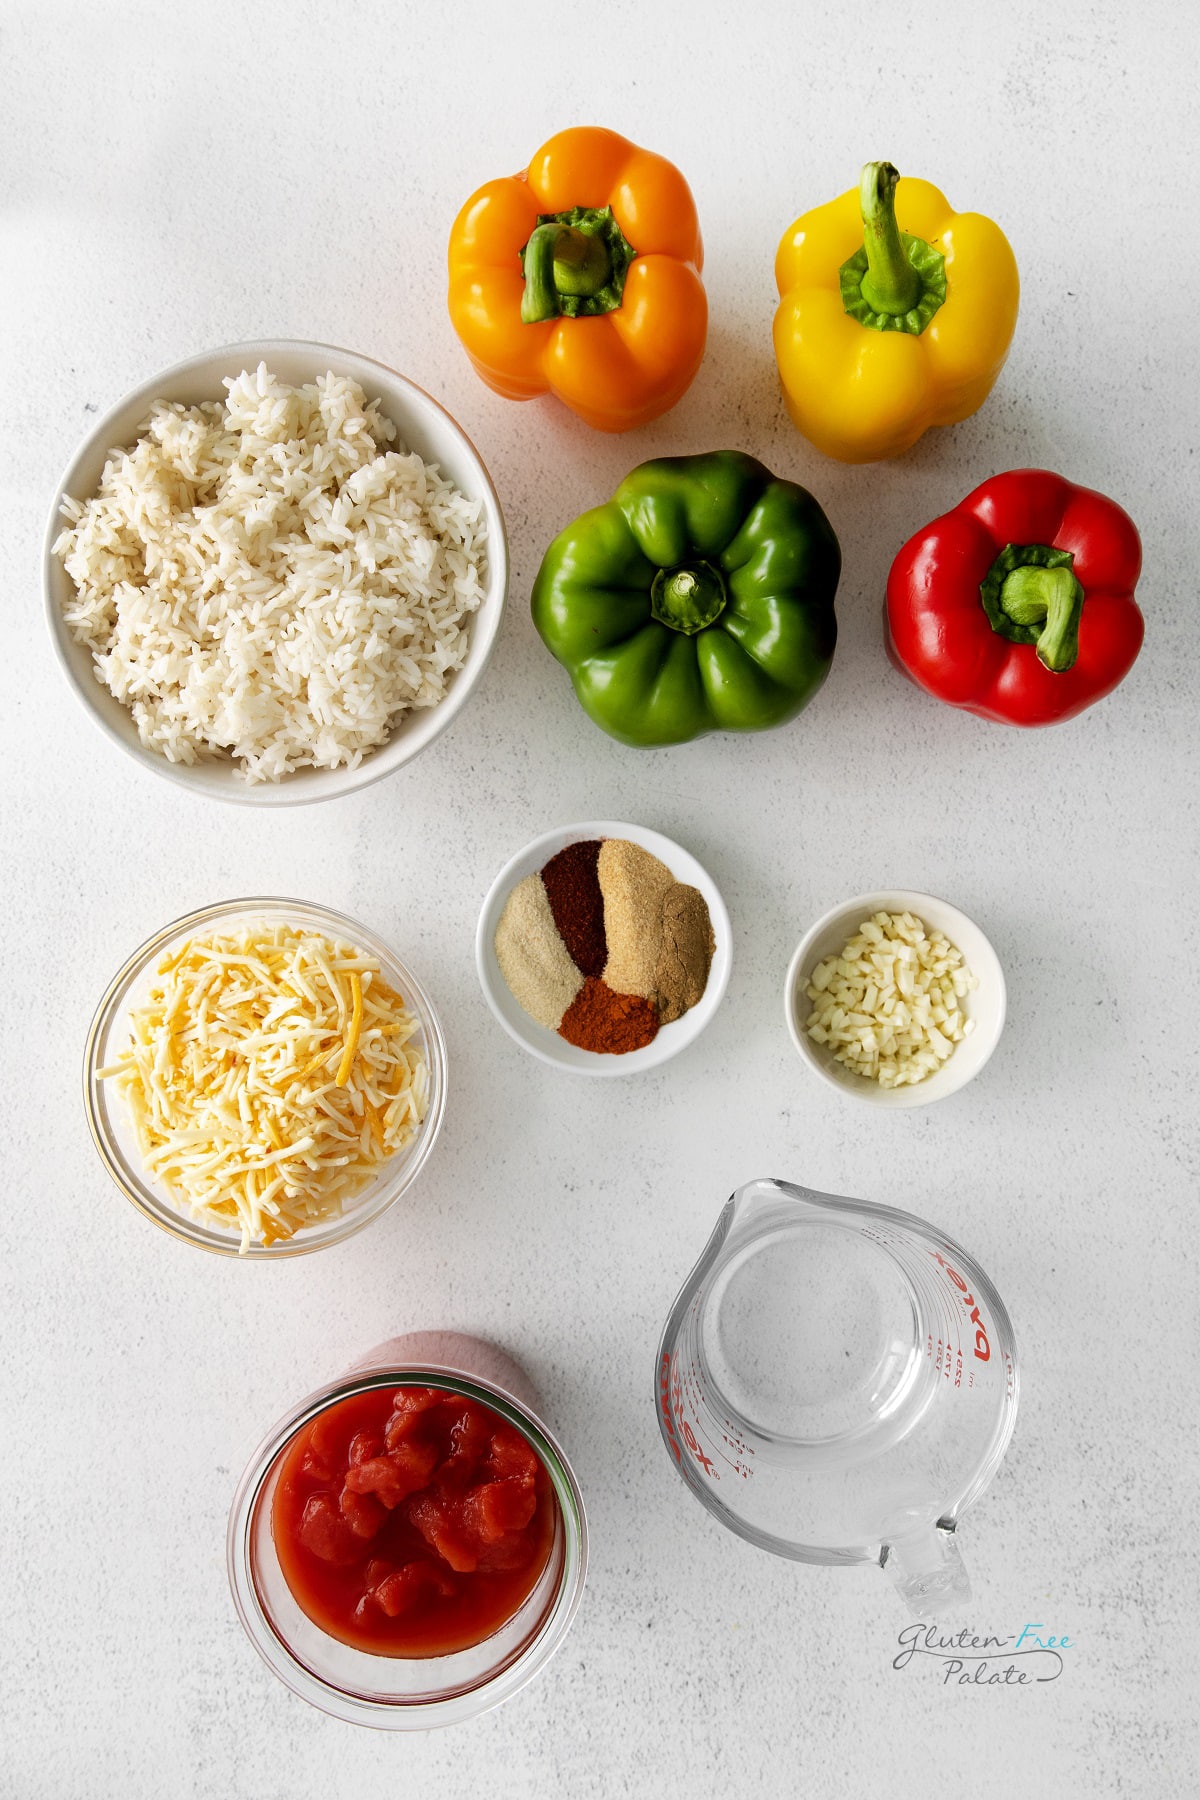 The ingredients for rice and cheese stuffed peppers on a concrete countertop, including multicolored bell peppers, seasonings, and tomatoes